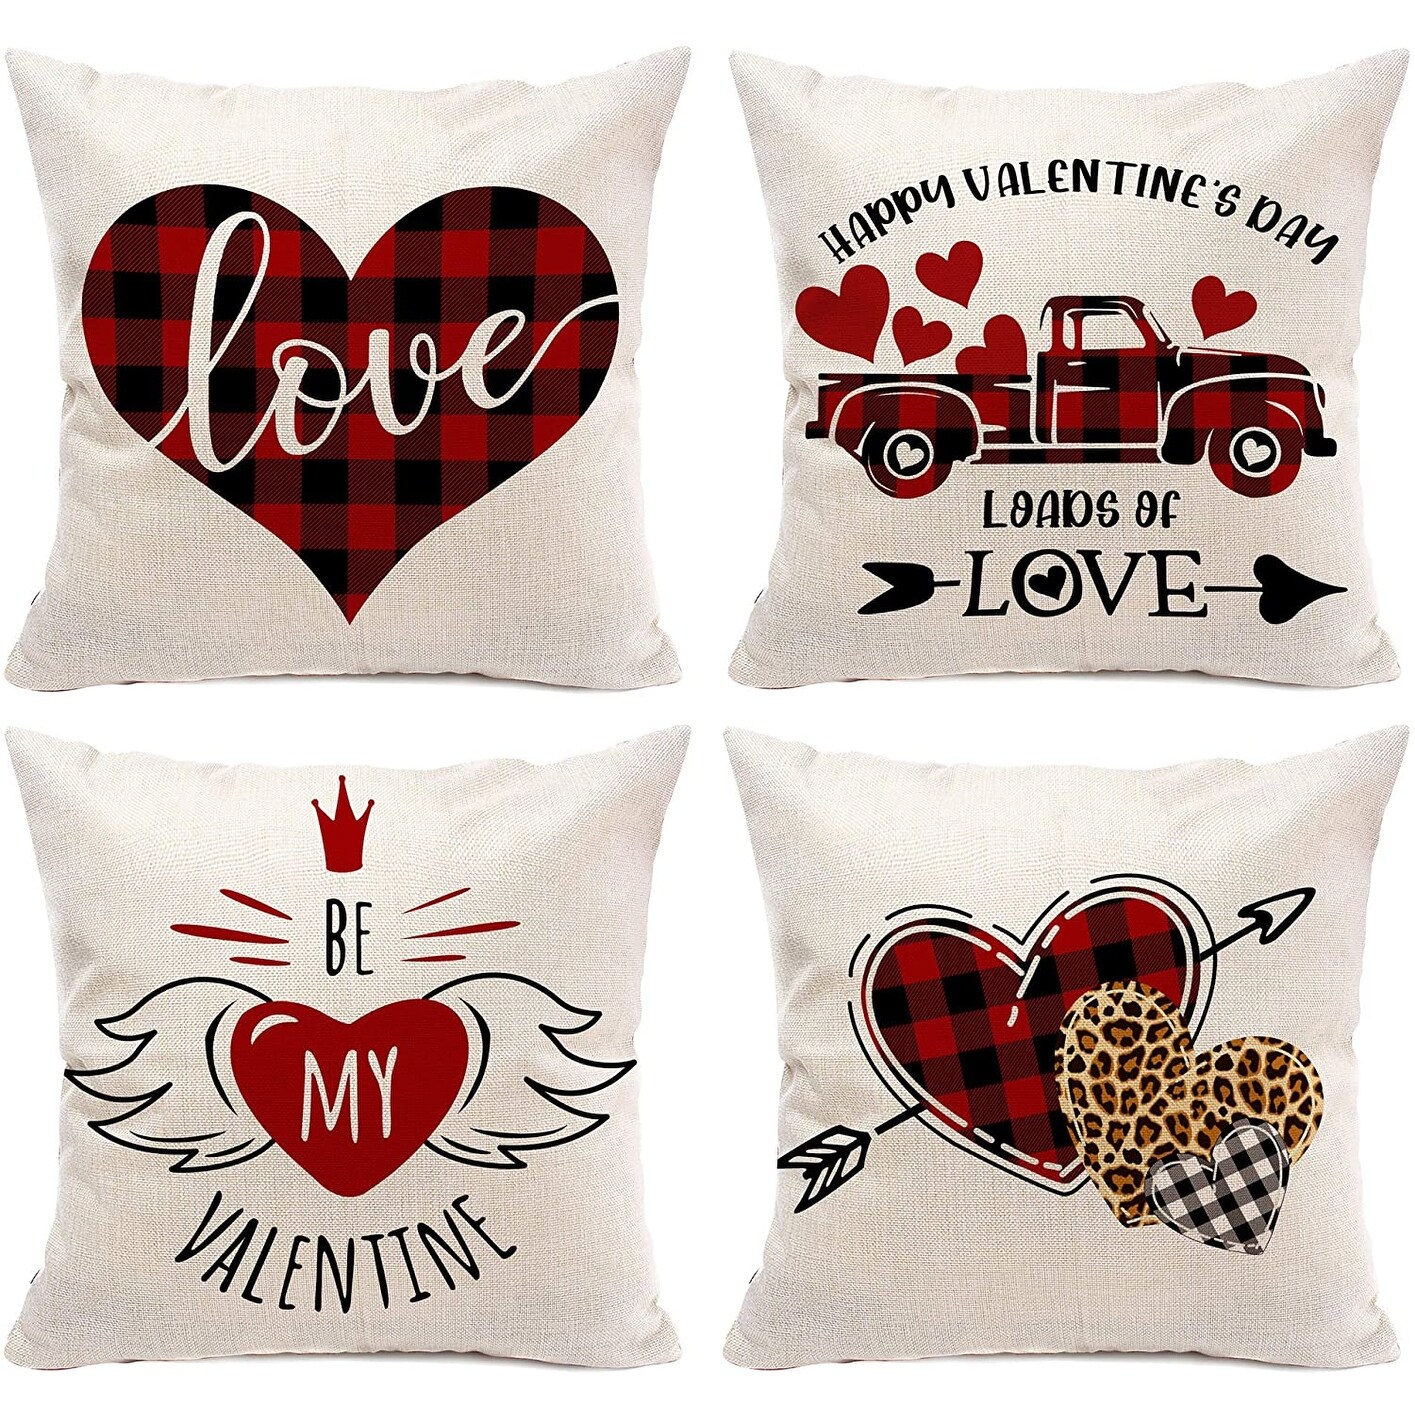 Valentines Love Pillow Only You Pillow Case 18x18, Personalized Pillow Case Valentines Premium Pillow Case I love You Pillow Cover